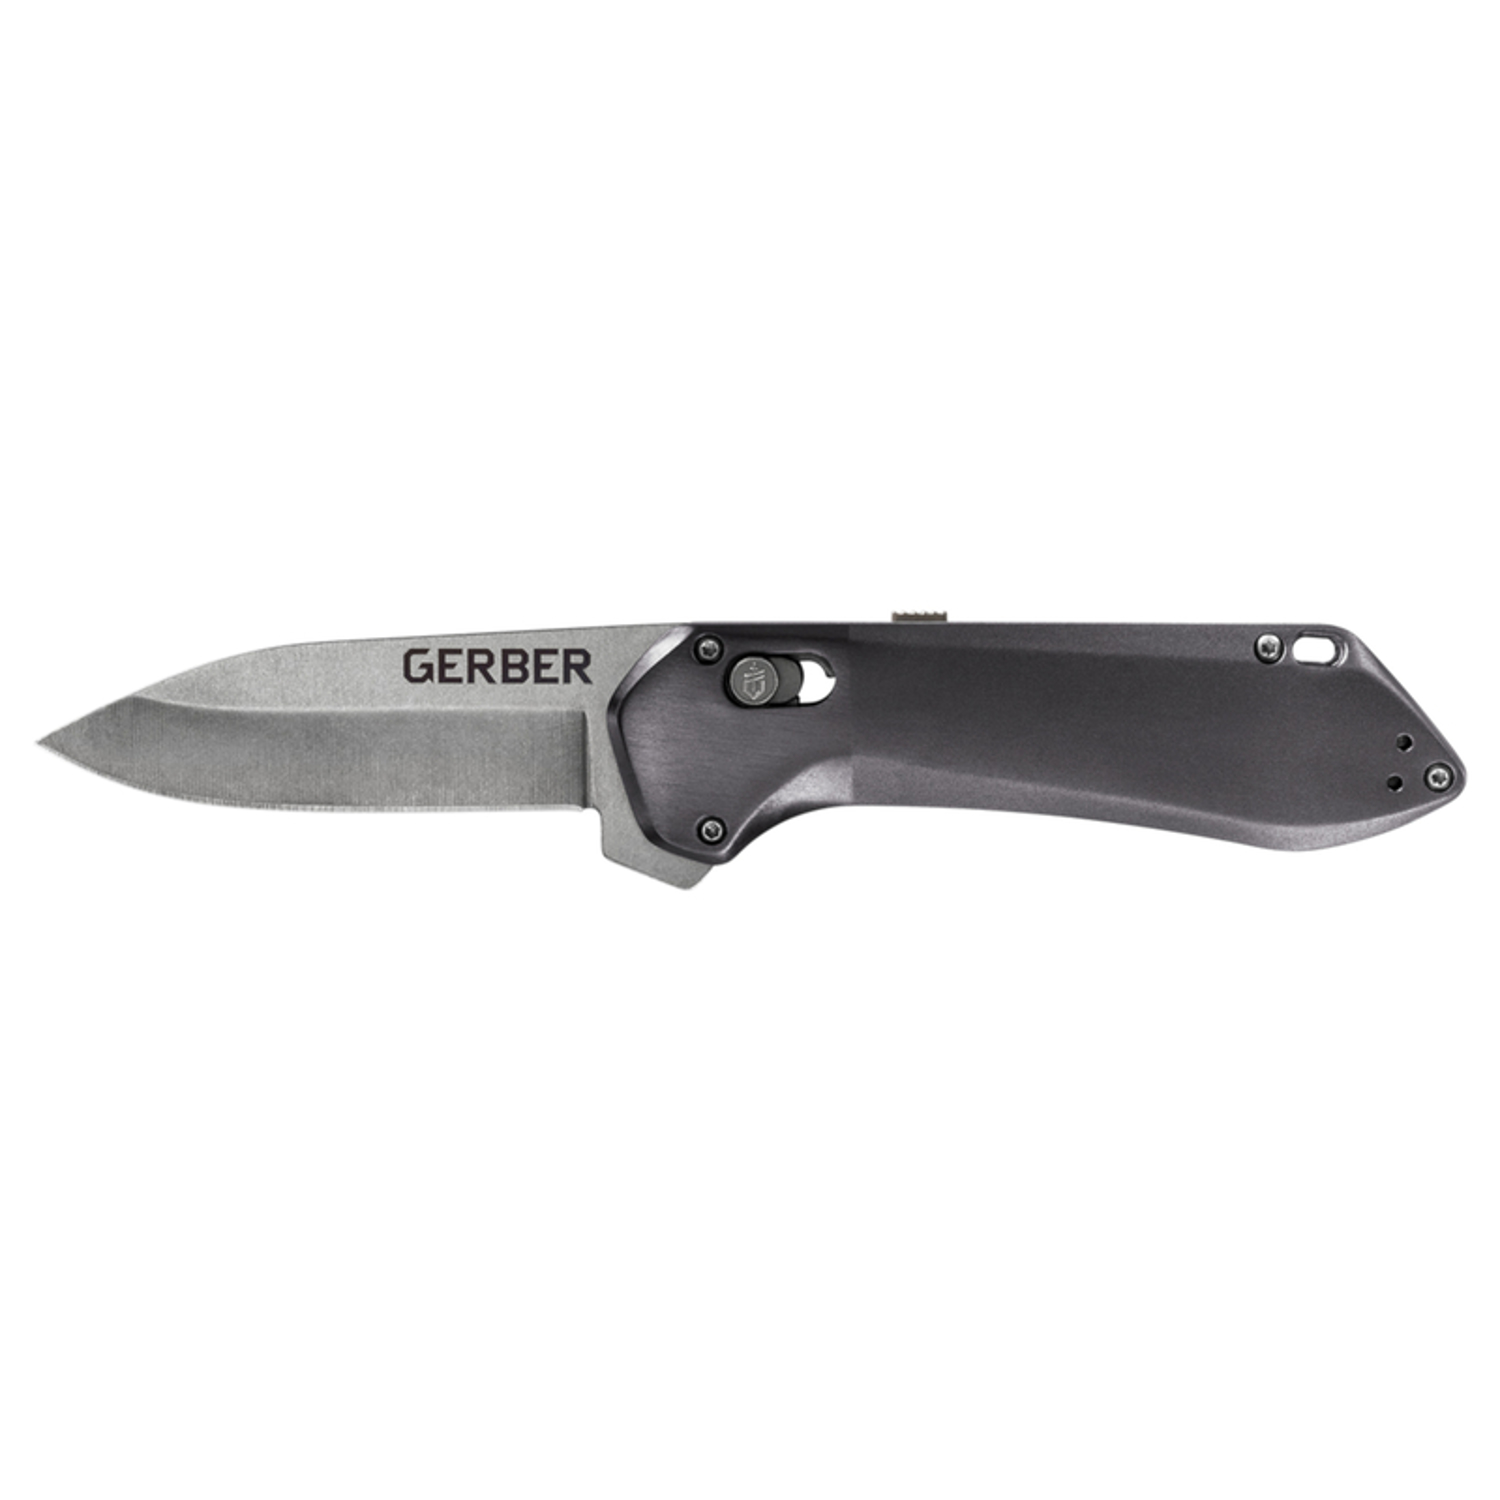 Photos - Other sporting goods Gerber Highbrow Black 7CR17MOV Steel 6.9 in. Folding Knife 31-003507N 